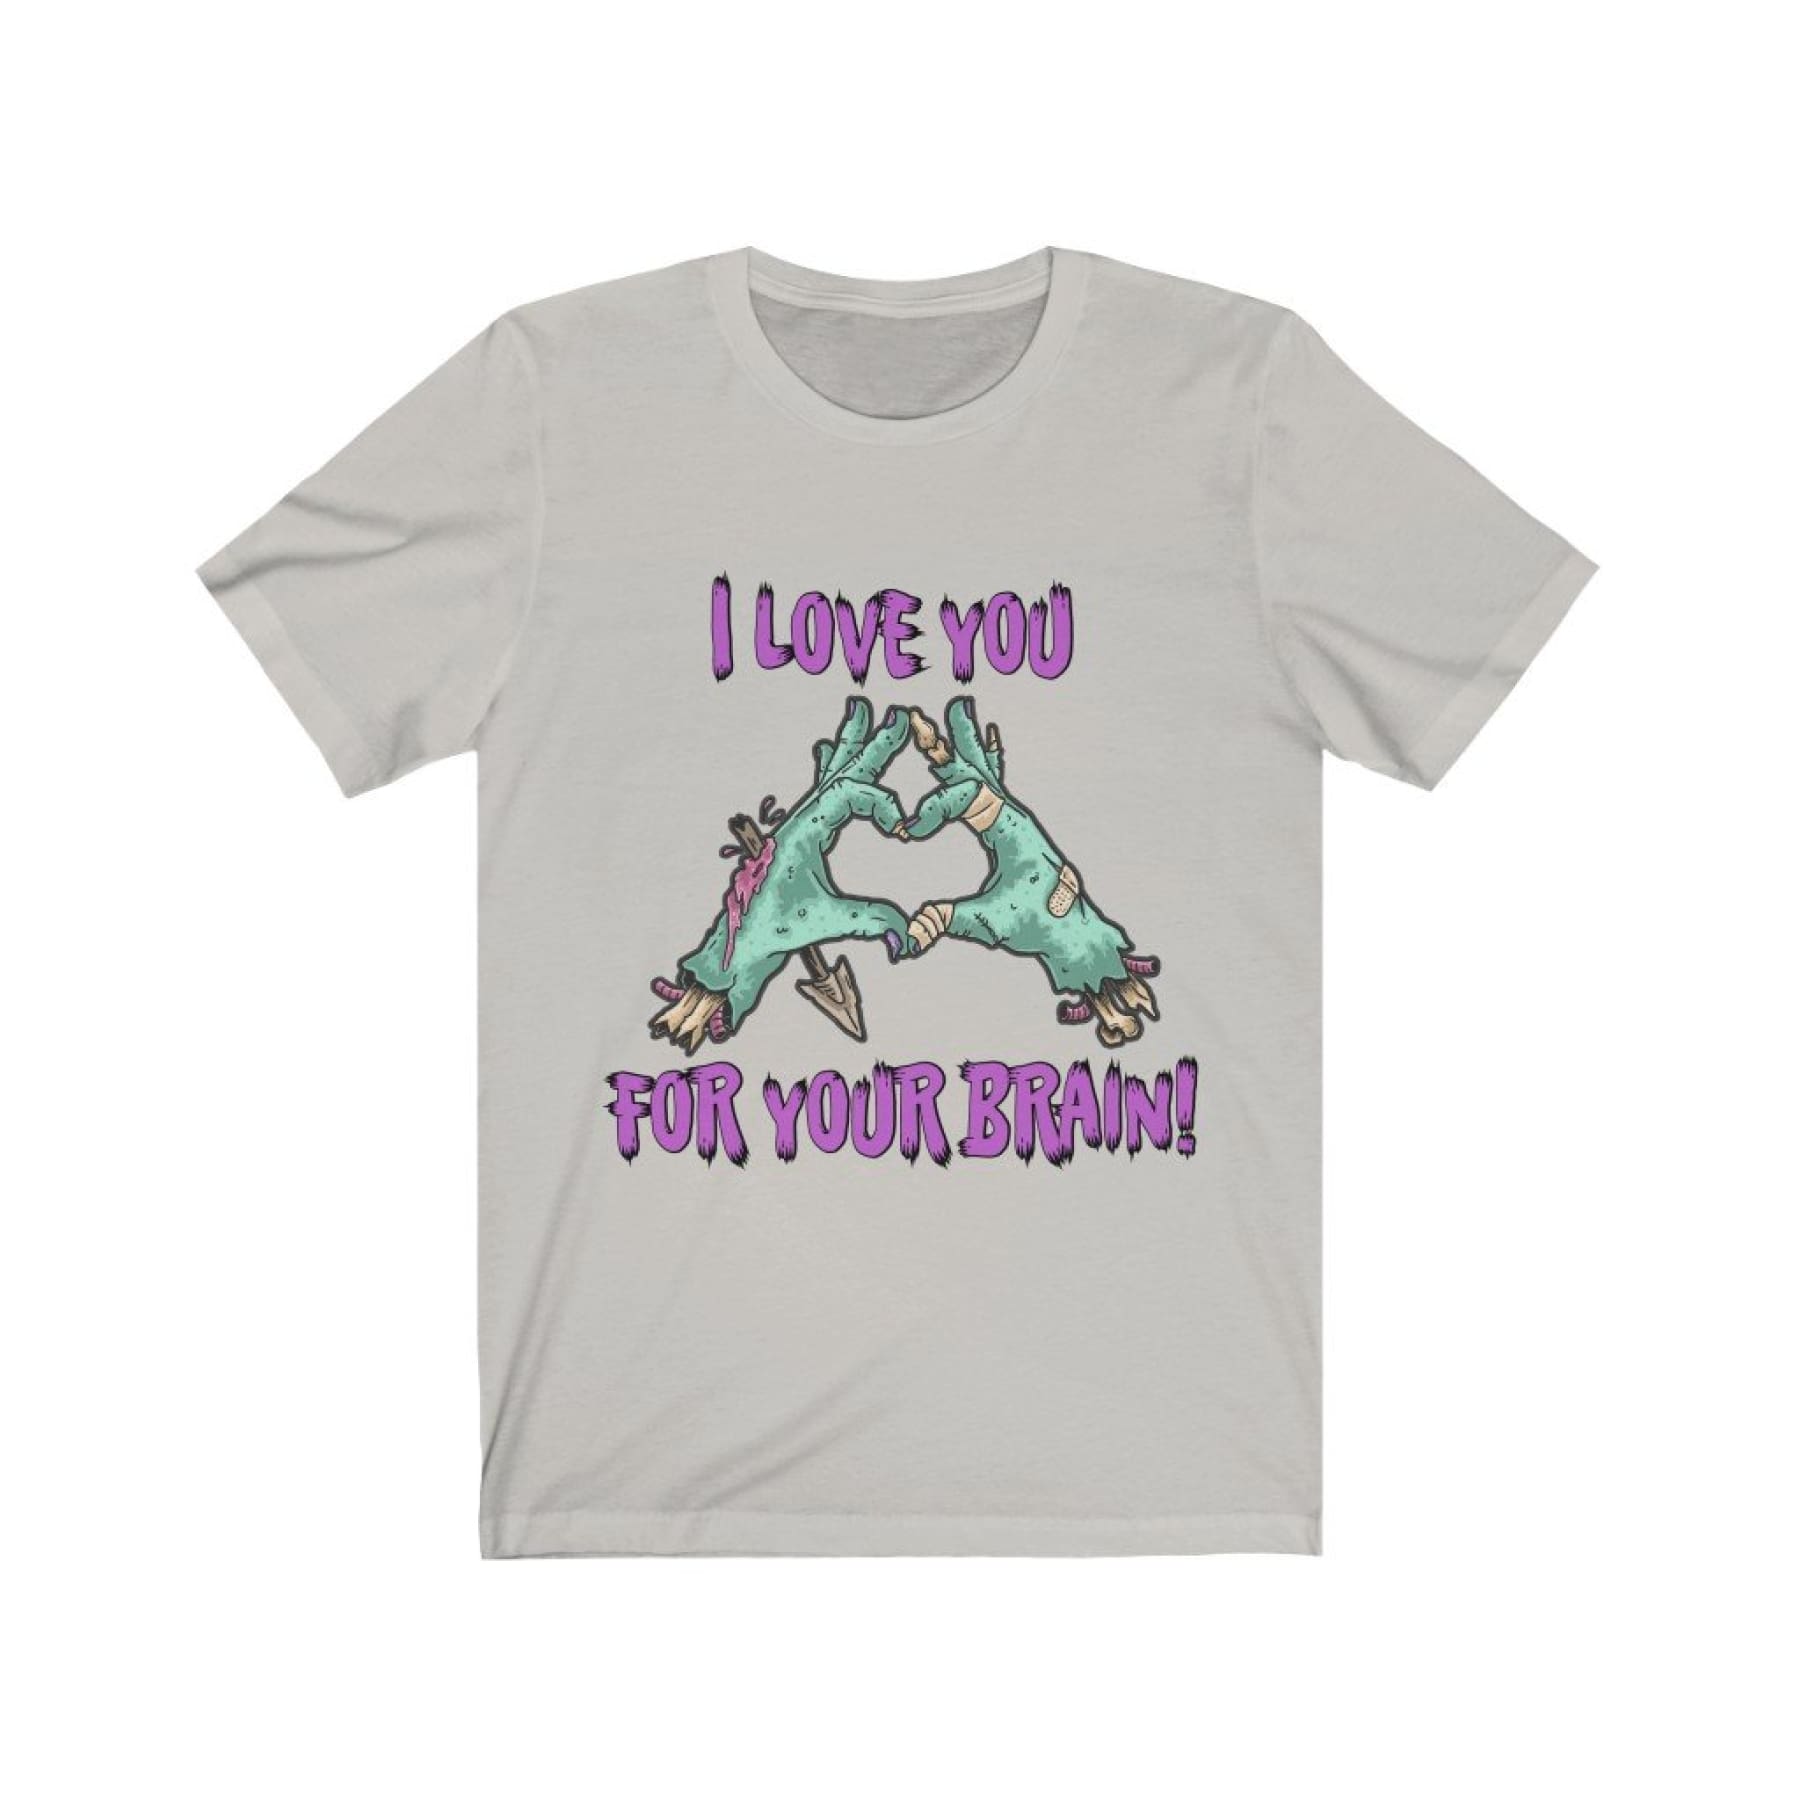 Zombie, I love you for your Brain! unisex Tee